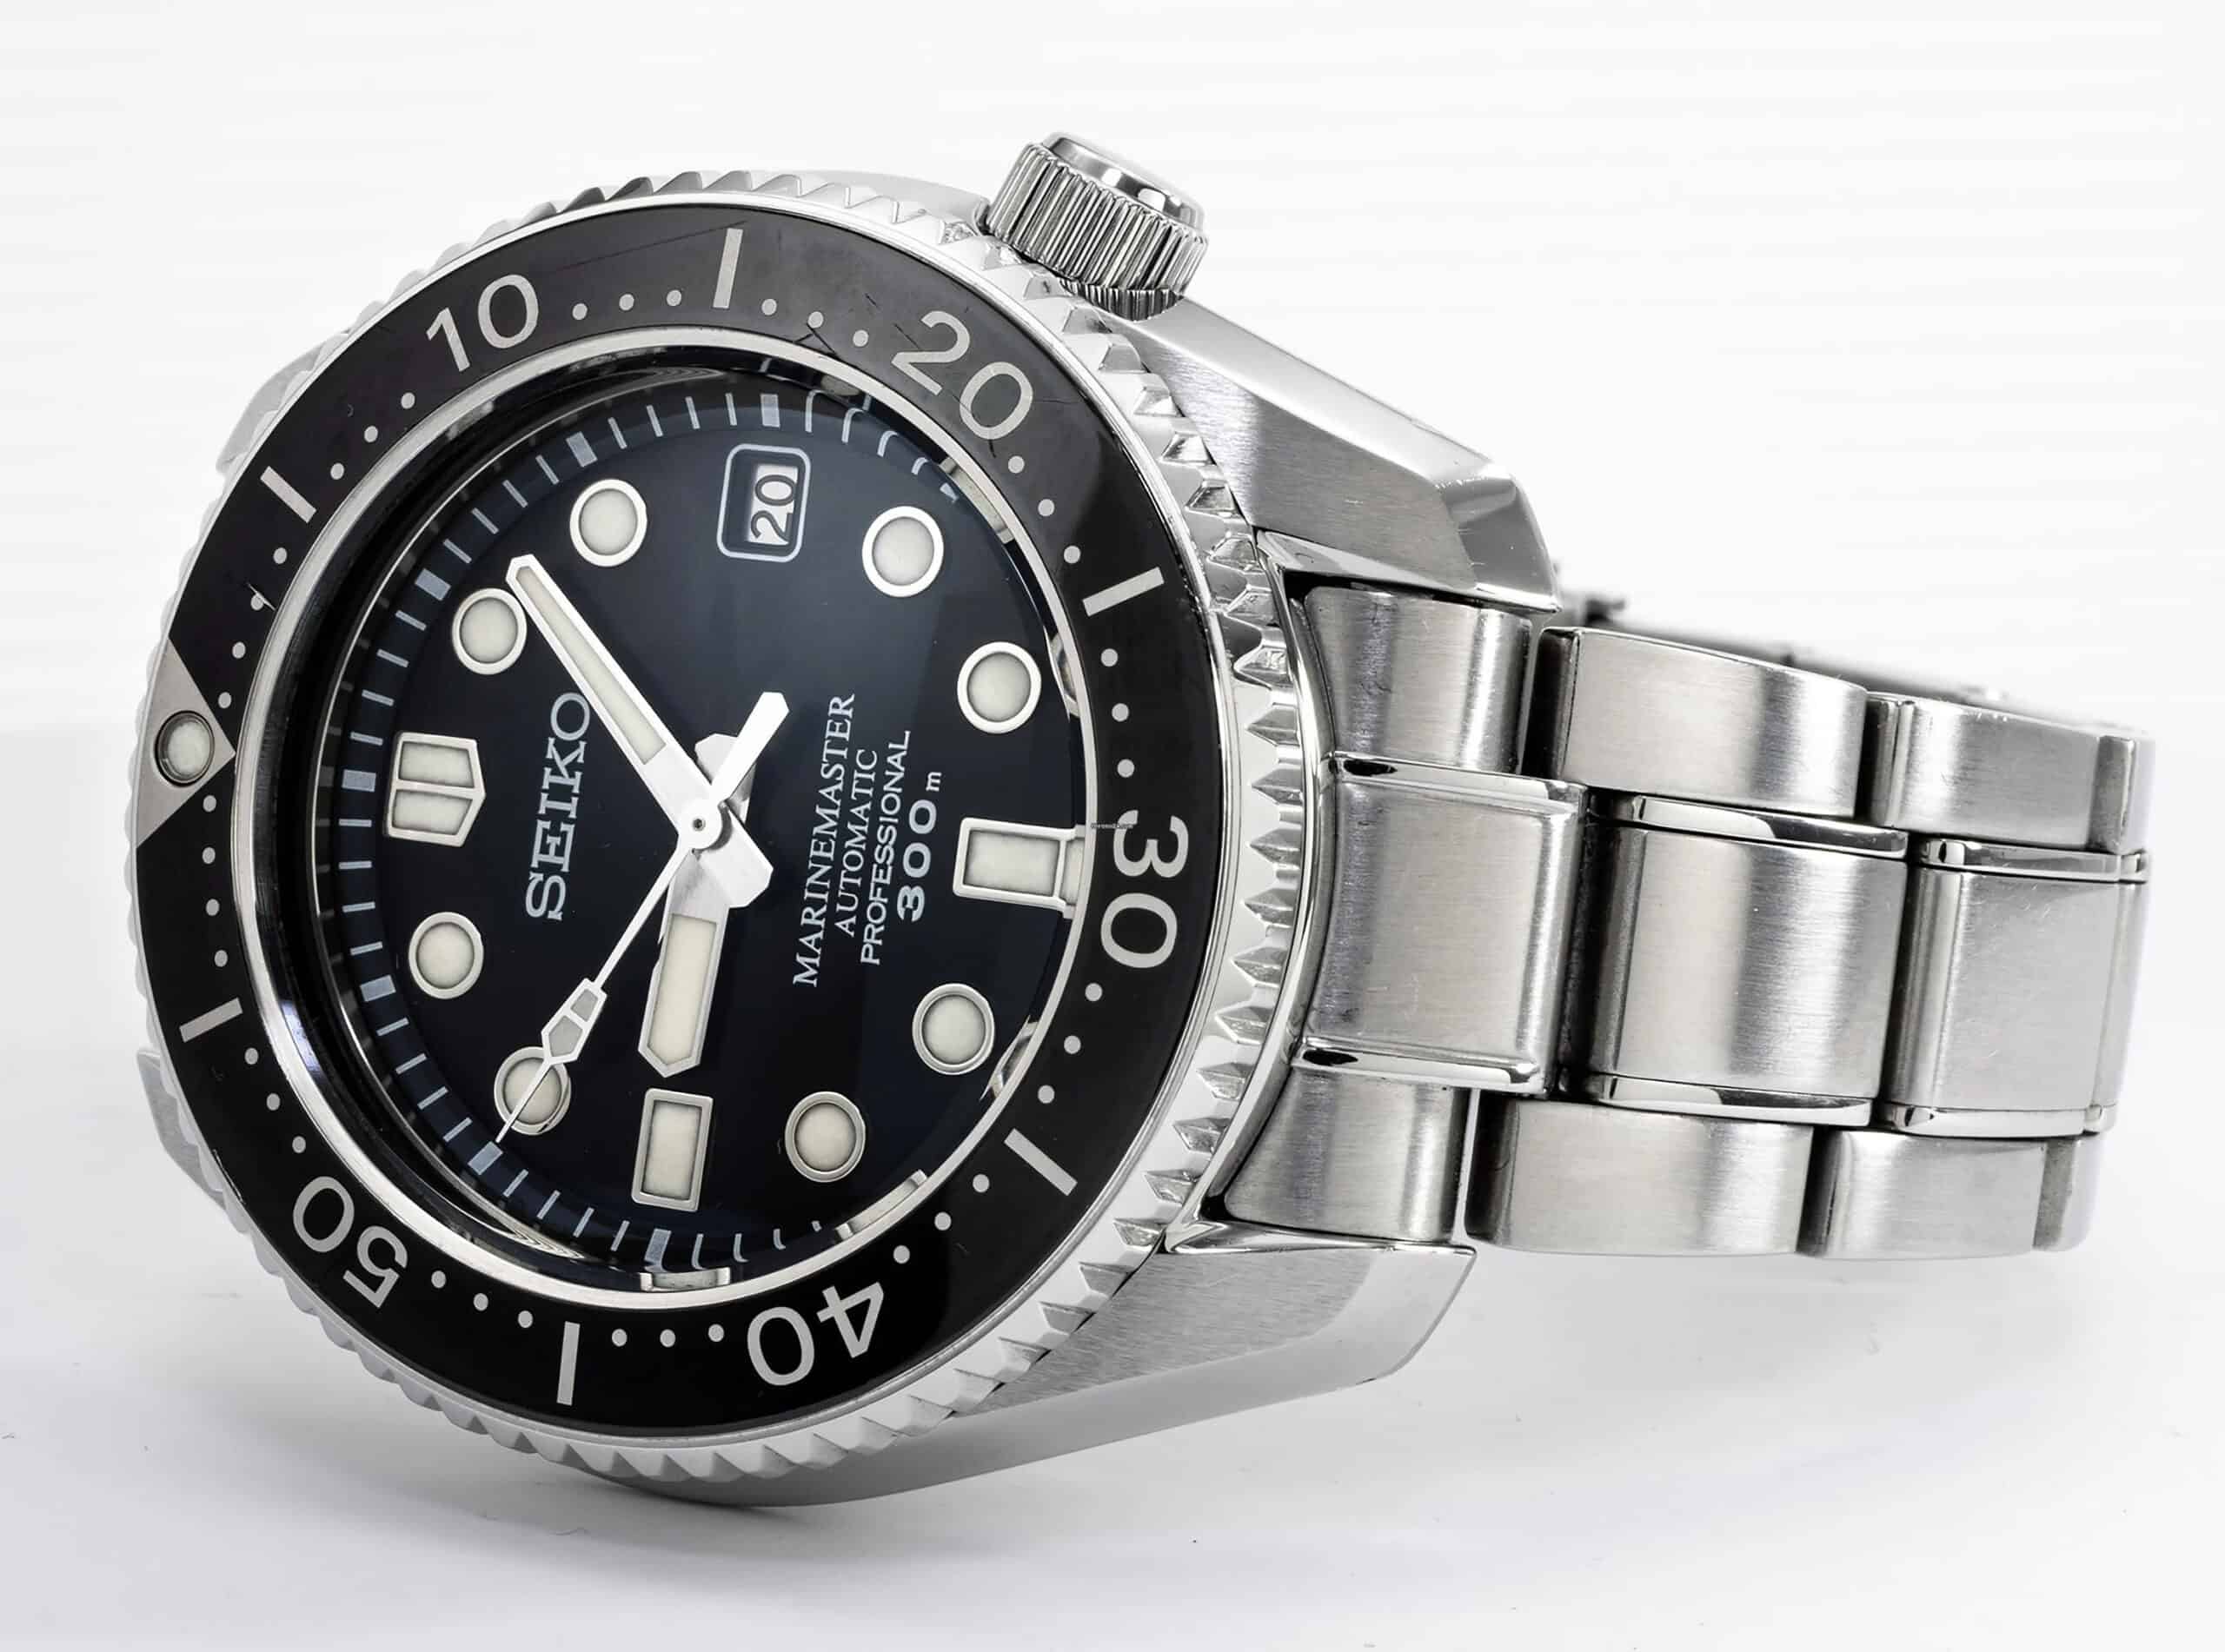 Seiko Marinemaster 300 Sbdx001 Review The Diver That Keeps On Giving Watchdig